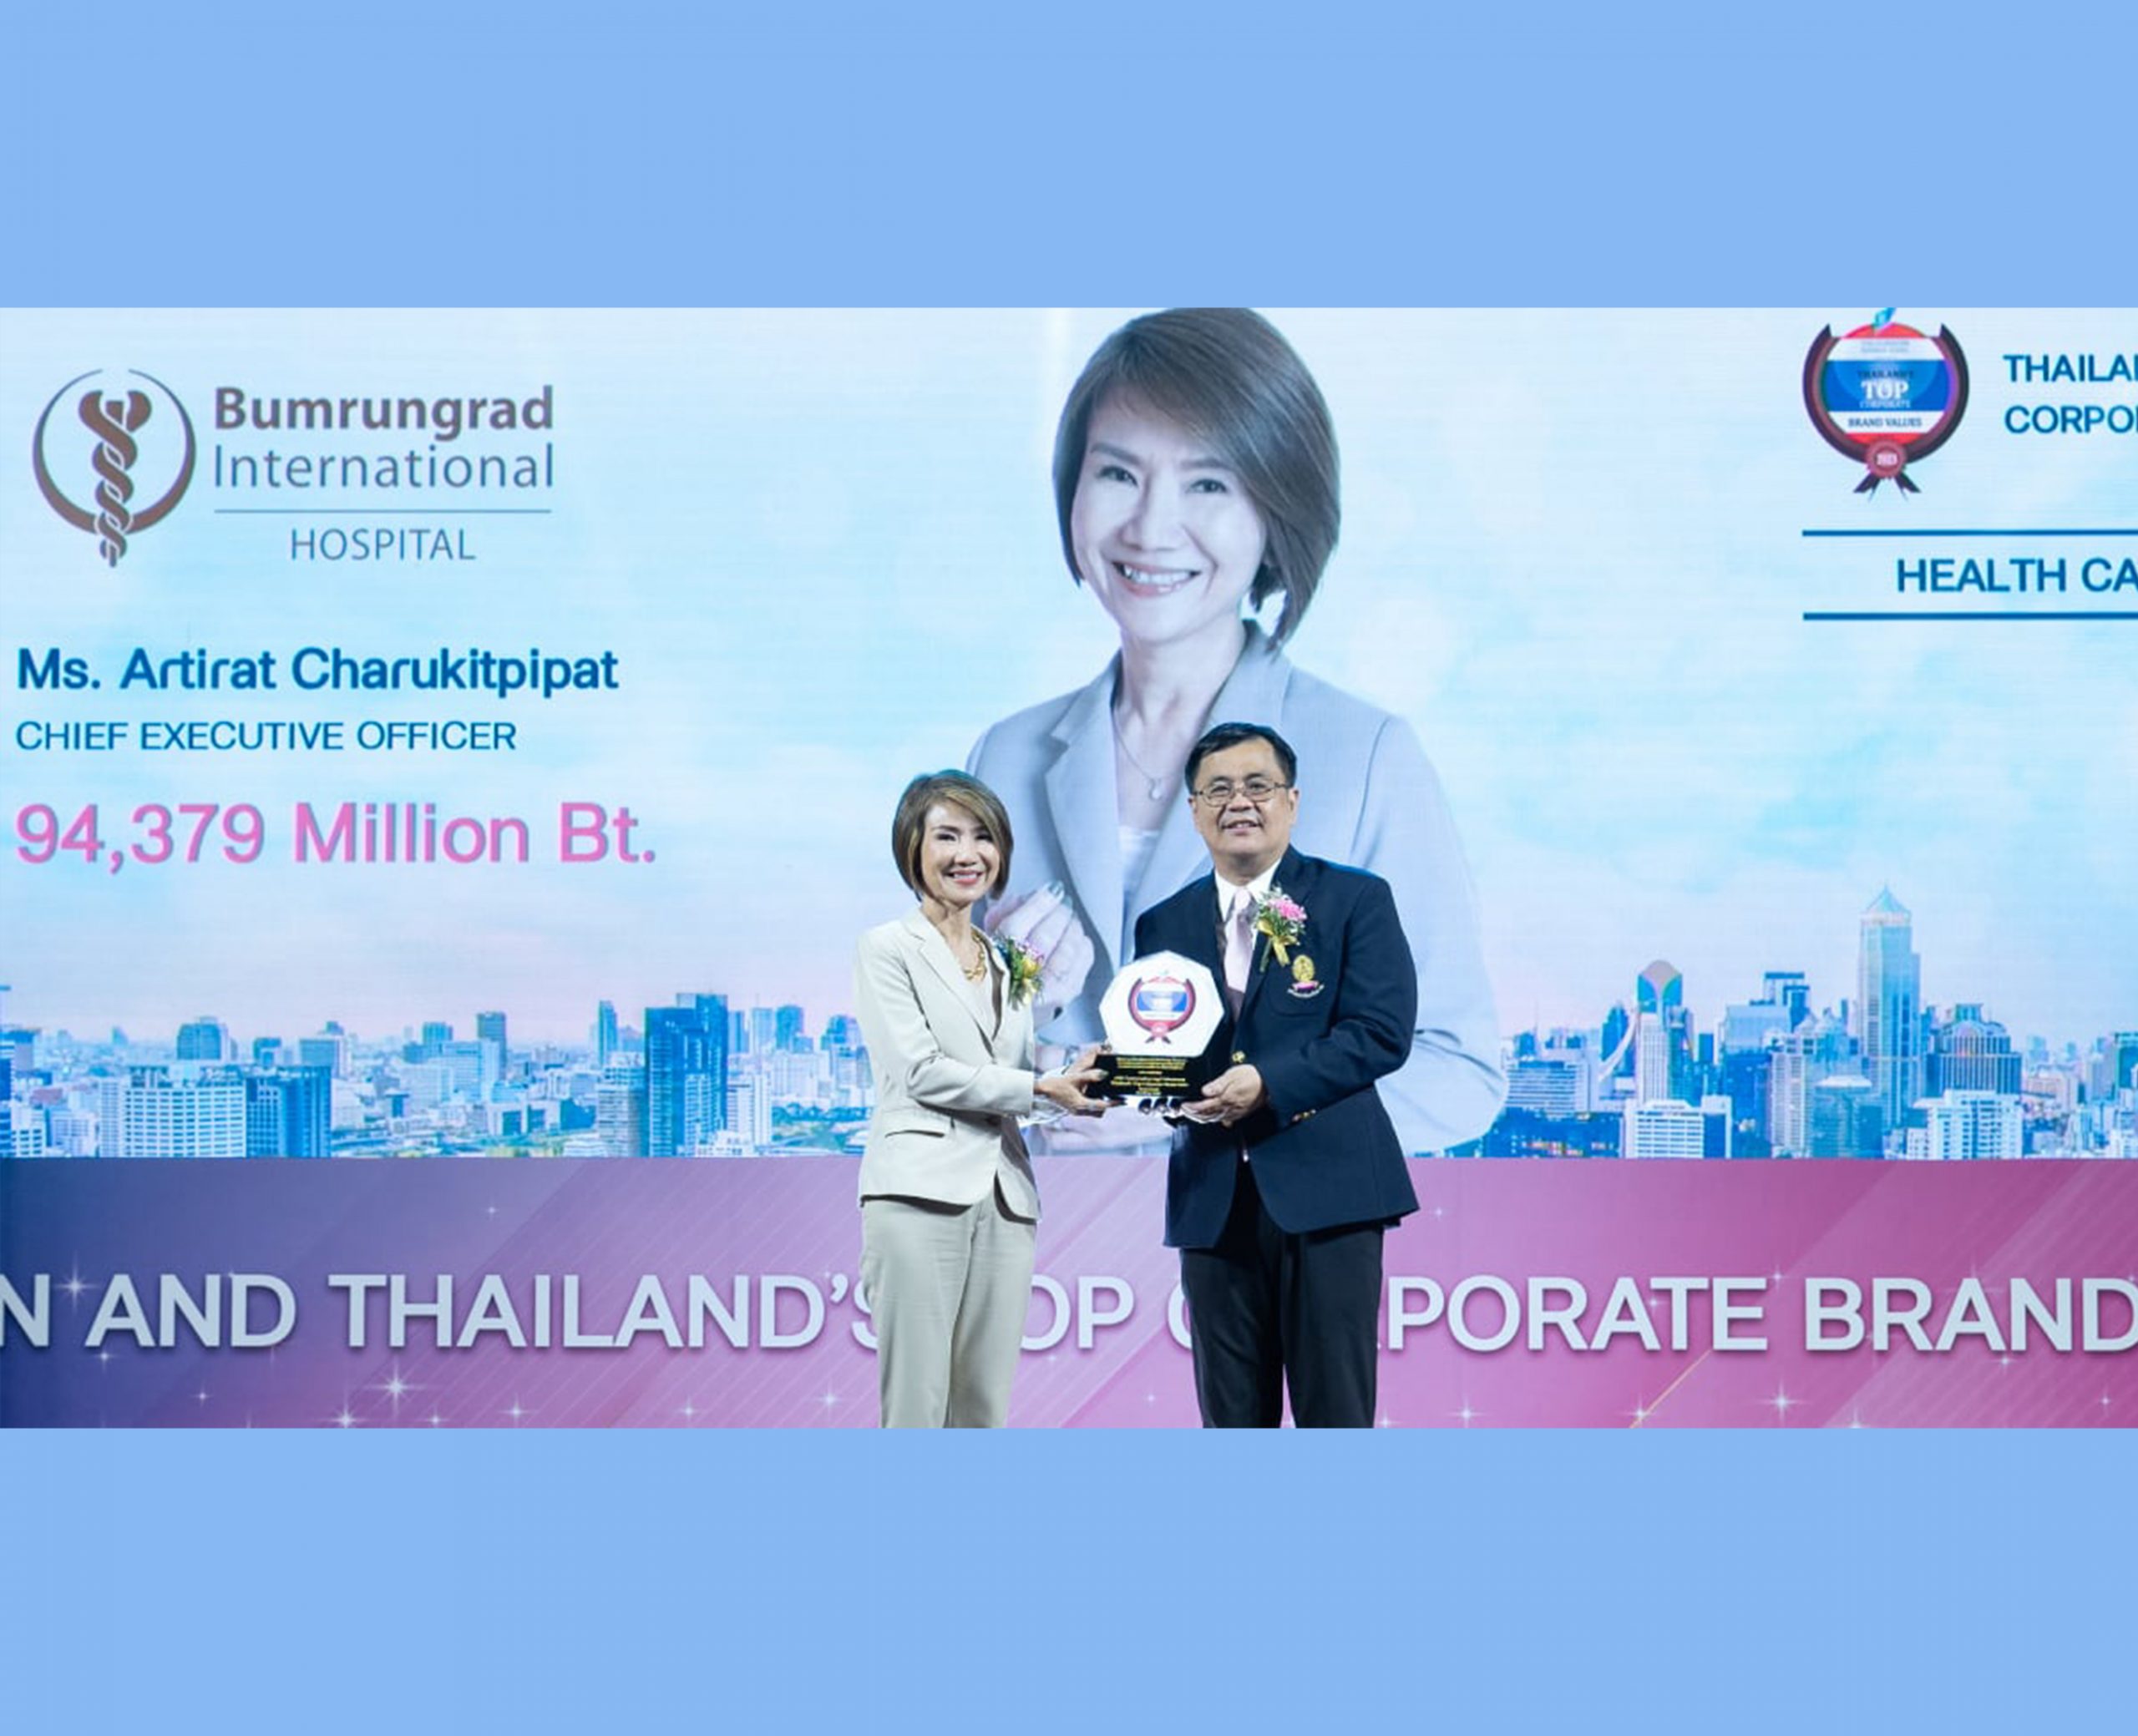 Bumrungrad International Hospital has been named “Thailand's Top Corporate Brand Values 2023” by the prestigious Faculty of Commerce and Accountancy at Chulalongkorn University and the Stock Exchange